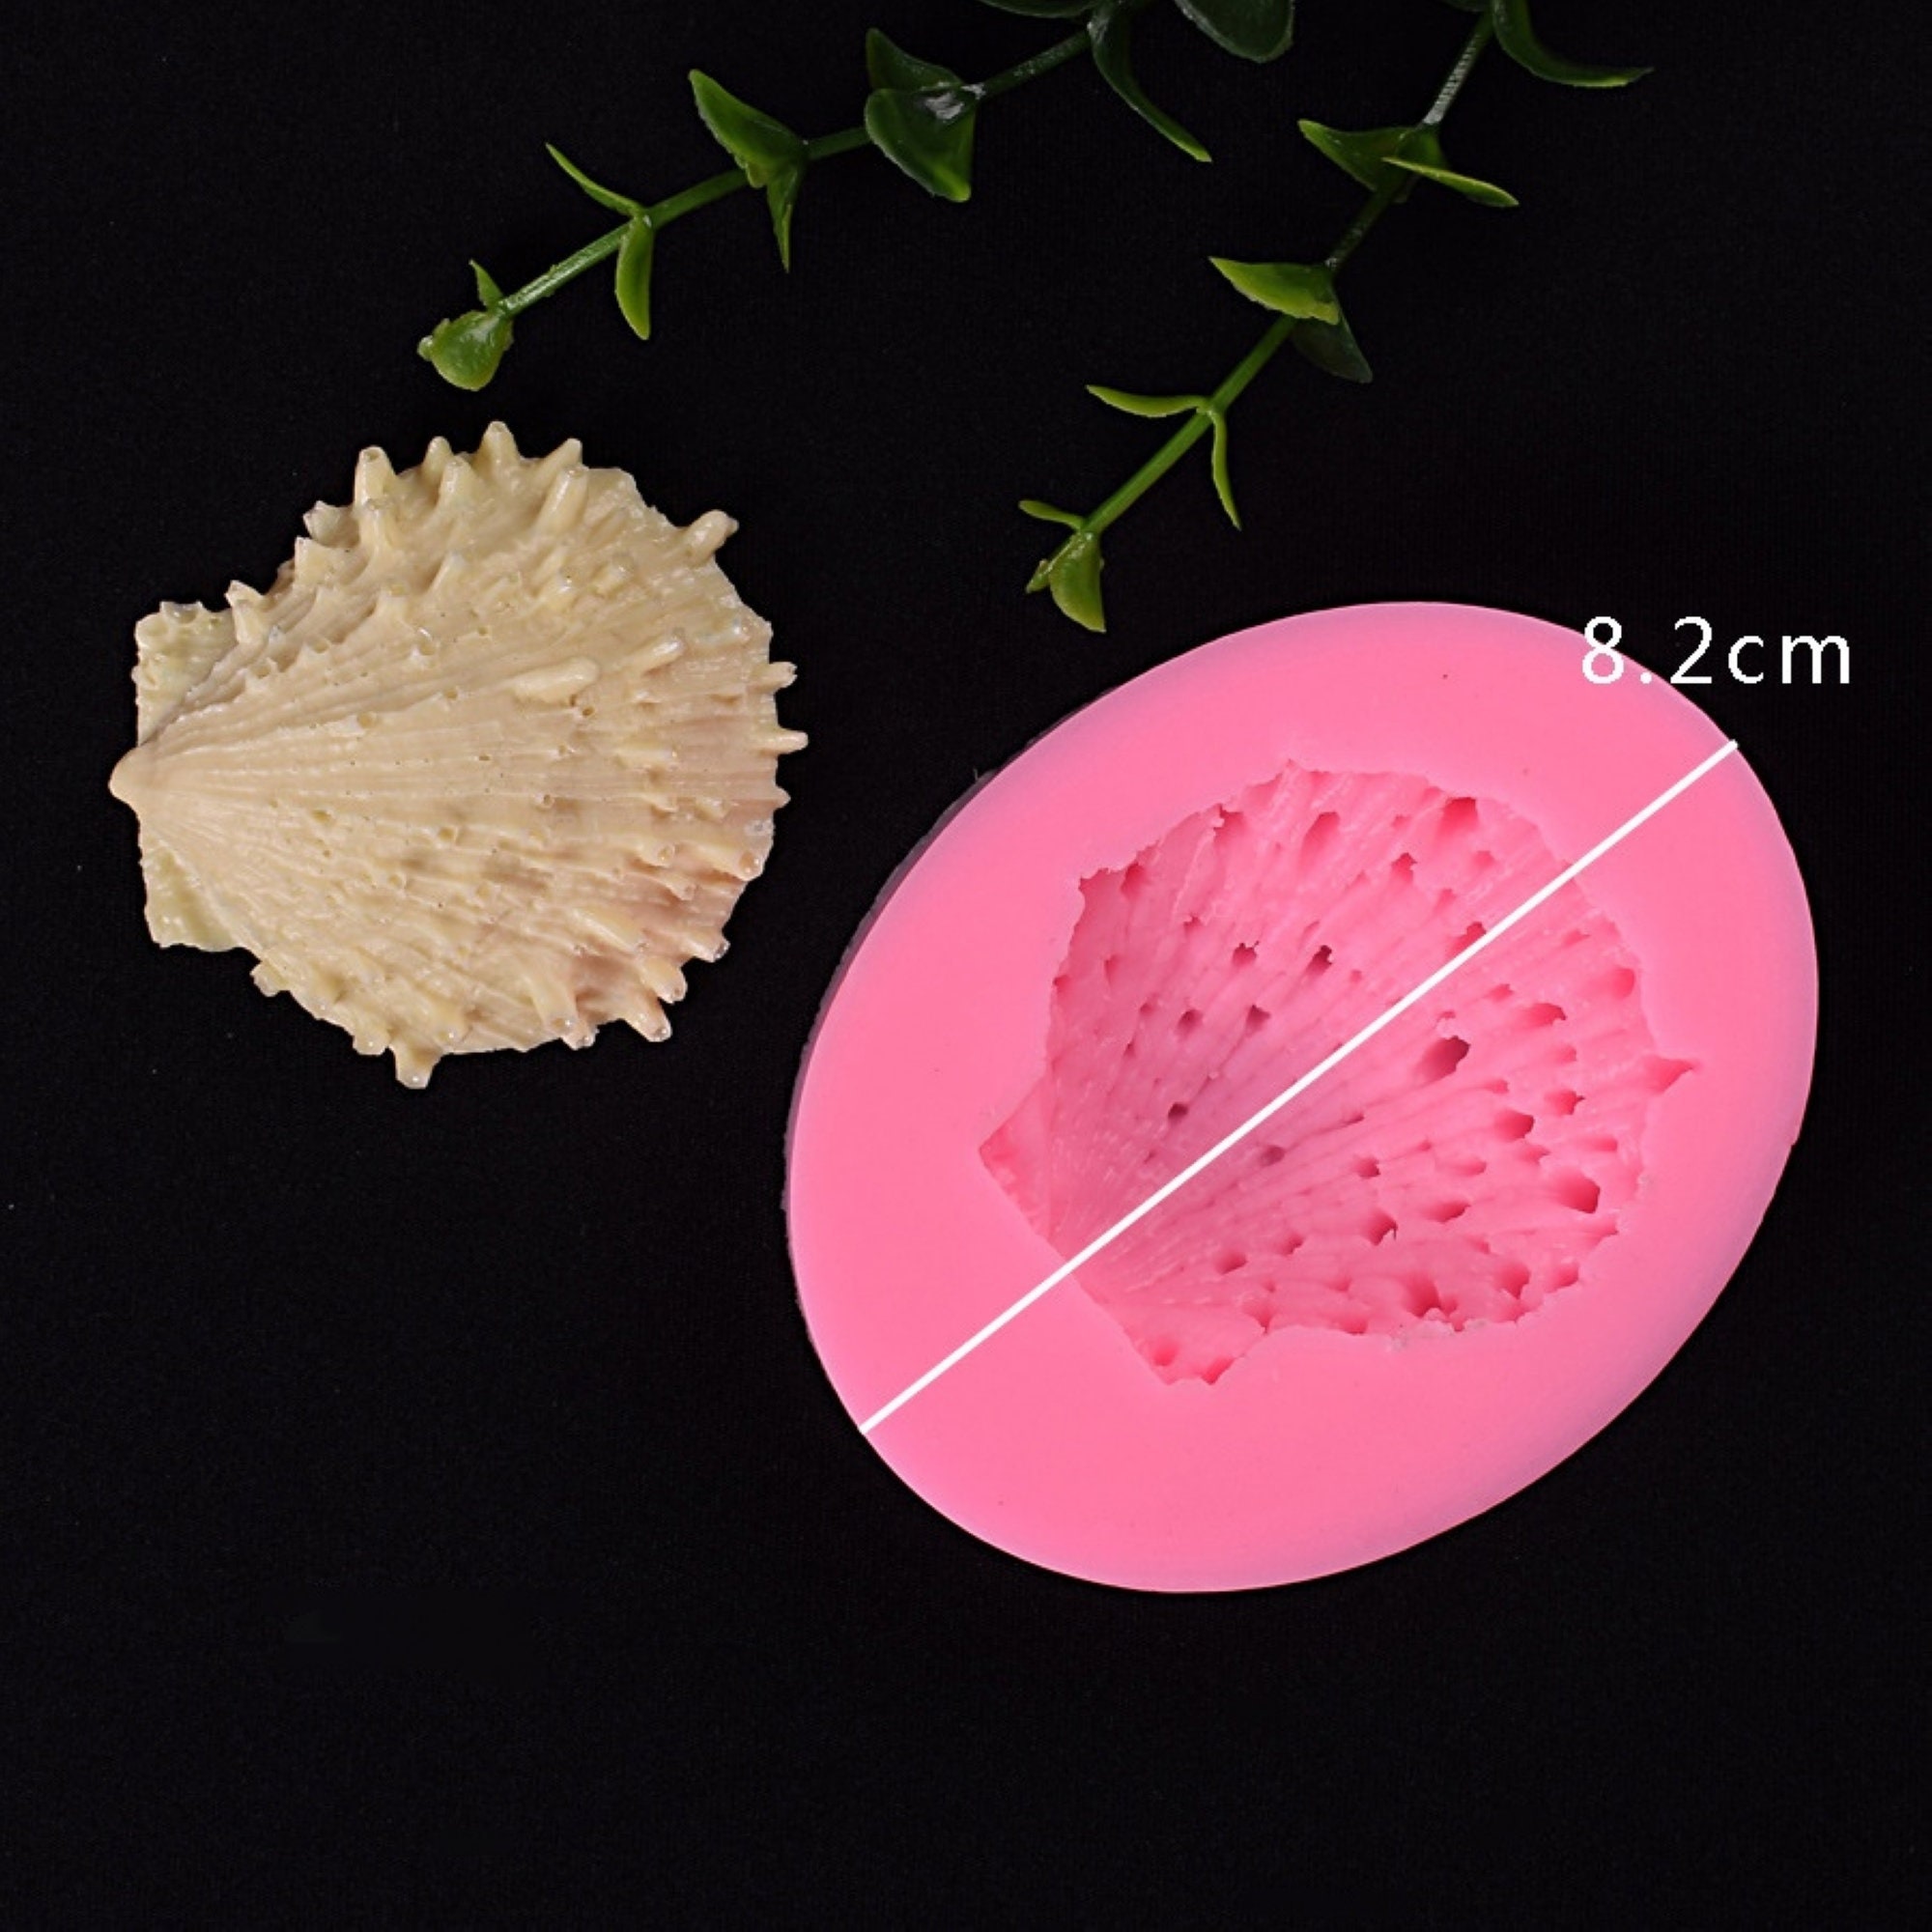 Buy Shells, Conch, Starfish Silicone Molds for Candy Fondant Cake  Decoration, Clay Knick-knack Mold, 7 Style Online in India 